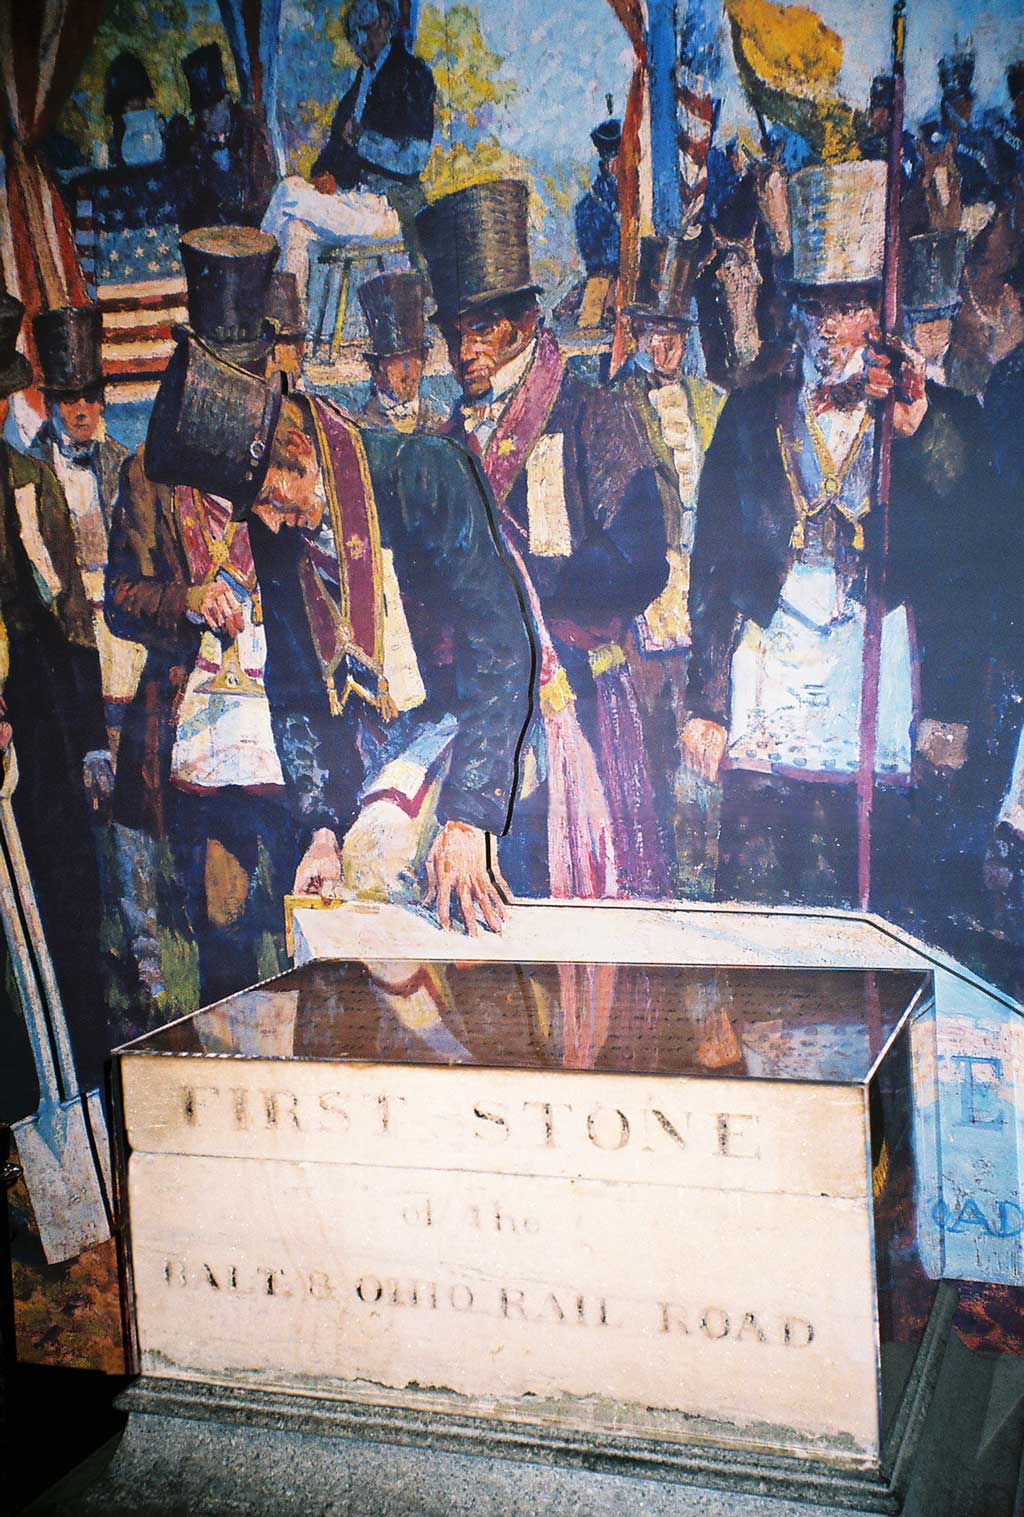 Cornerstone of the Baltimore and Ohio Railroad, being laid on July 4, 1828 by Charles Carroll of Carrollton, last surviving signer of the Declaration of Independence.